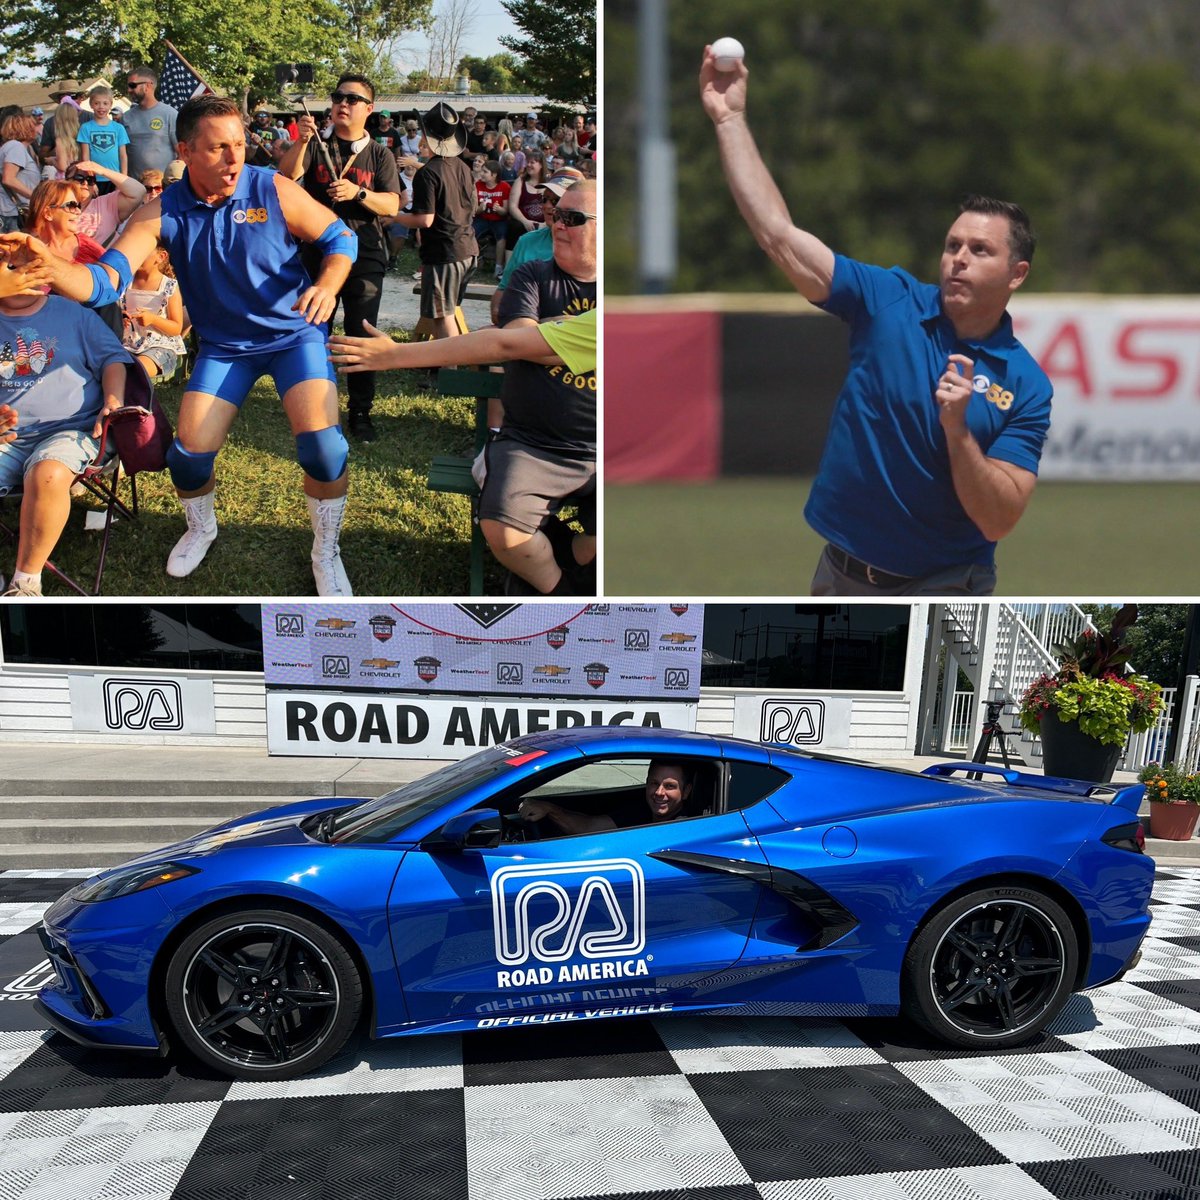 Representing @CBS58 in the most unique ways this week! 

SATURDAY - in Ashippun at @BlizzardBrawl pro-wrestling.

SUNDAY - in Mequon throwing out the first pitch at the @LS_Chinooks game

MONDAY - in Elkhart Lake riding in the @roadamerica pace car for #58Hometowns

#THANKFUL